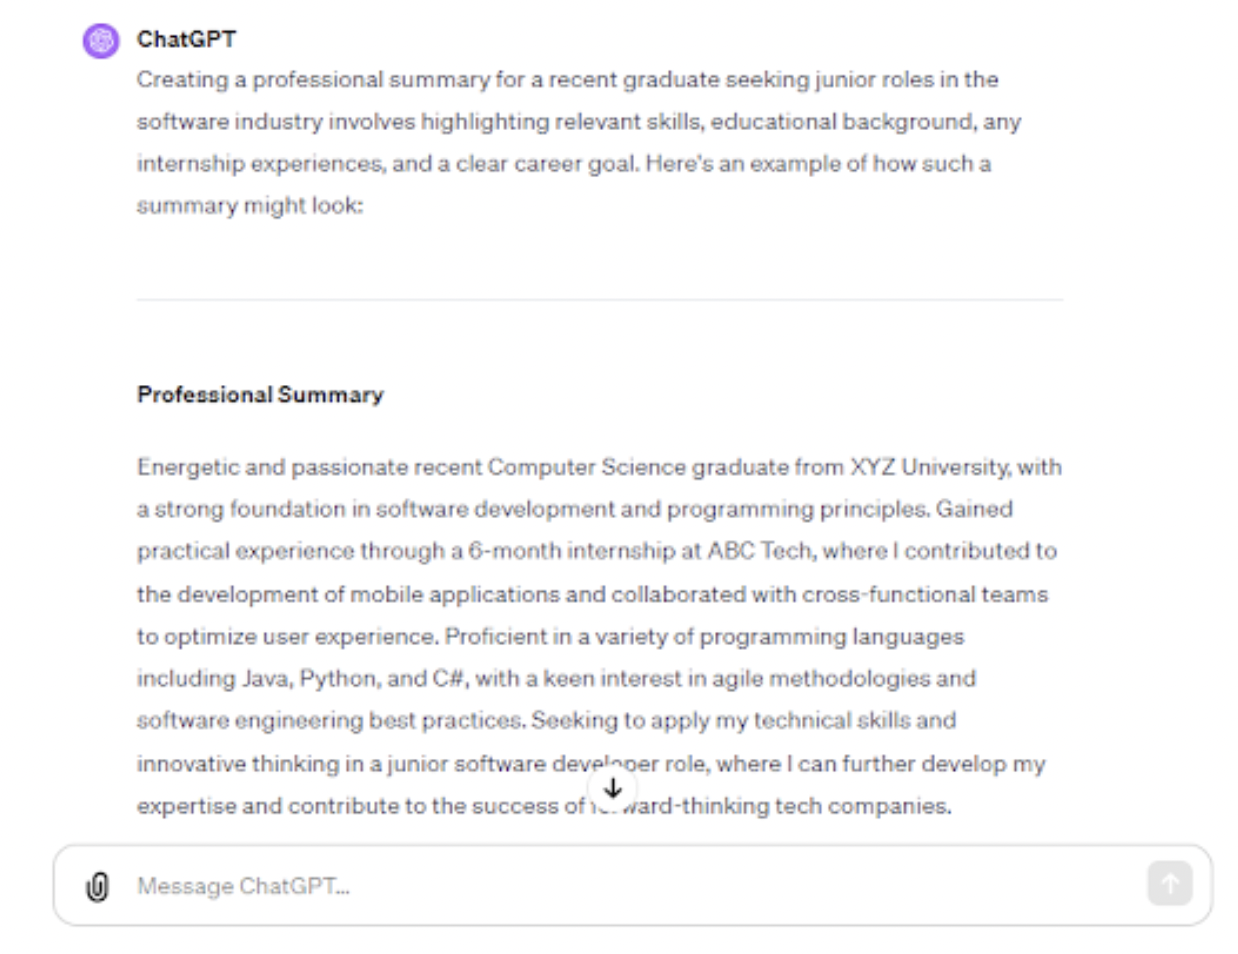 <p>While creating a resume, you should include an engaging professional summary that captures your qualifications, values, and career goals. Once again, ChatGPT can provide suggestions for wording and structuring the professional summary section.</p><p><br></p><p>For instance, the prompt “Create a professional summary for a recent graduate looking for junior roles in the software industry” resulted in the following ChatGPT output:</p><p><br></p><span class="copyright"> Upwork </span>